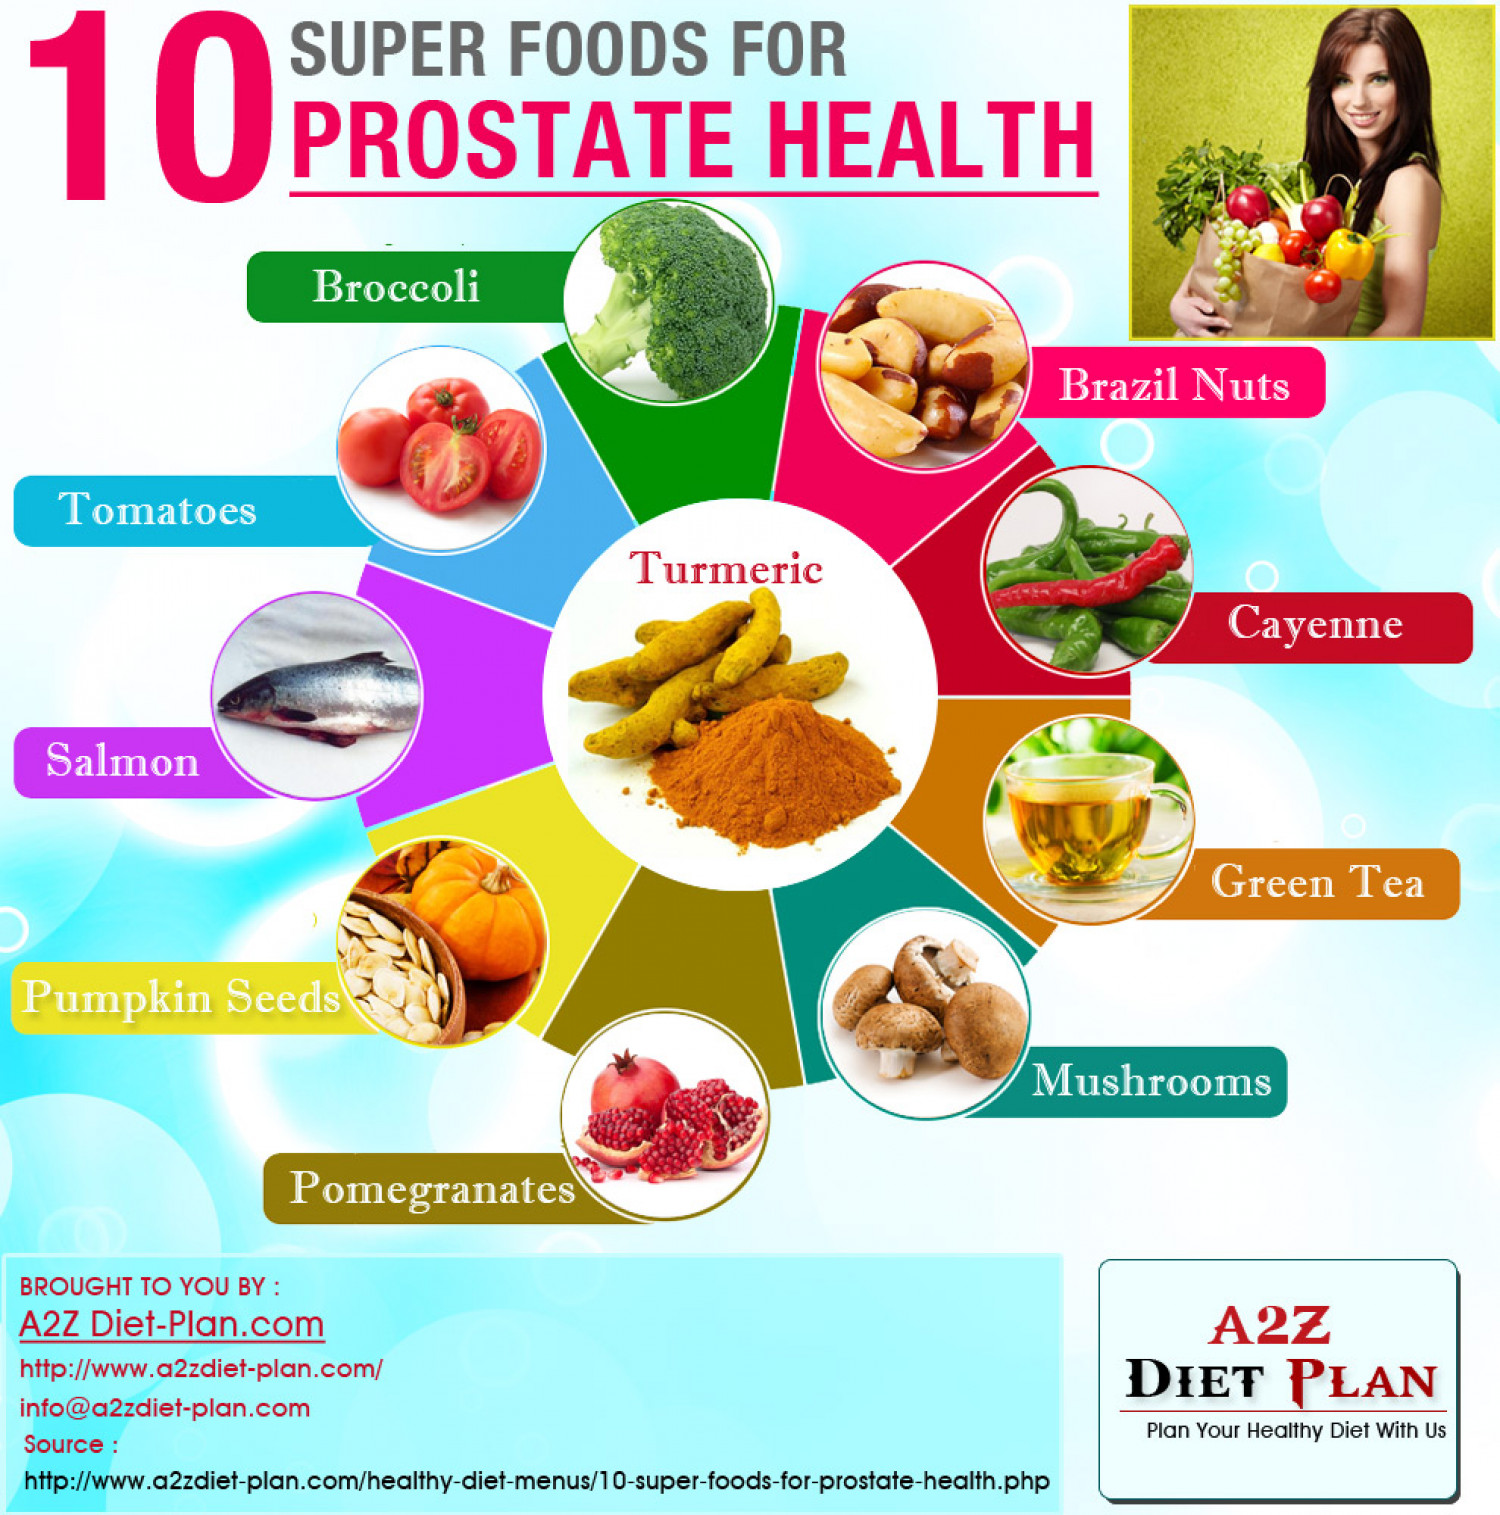 Foods That Cause Enlarged Prostate - ProstateProHelp.com